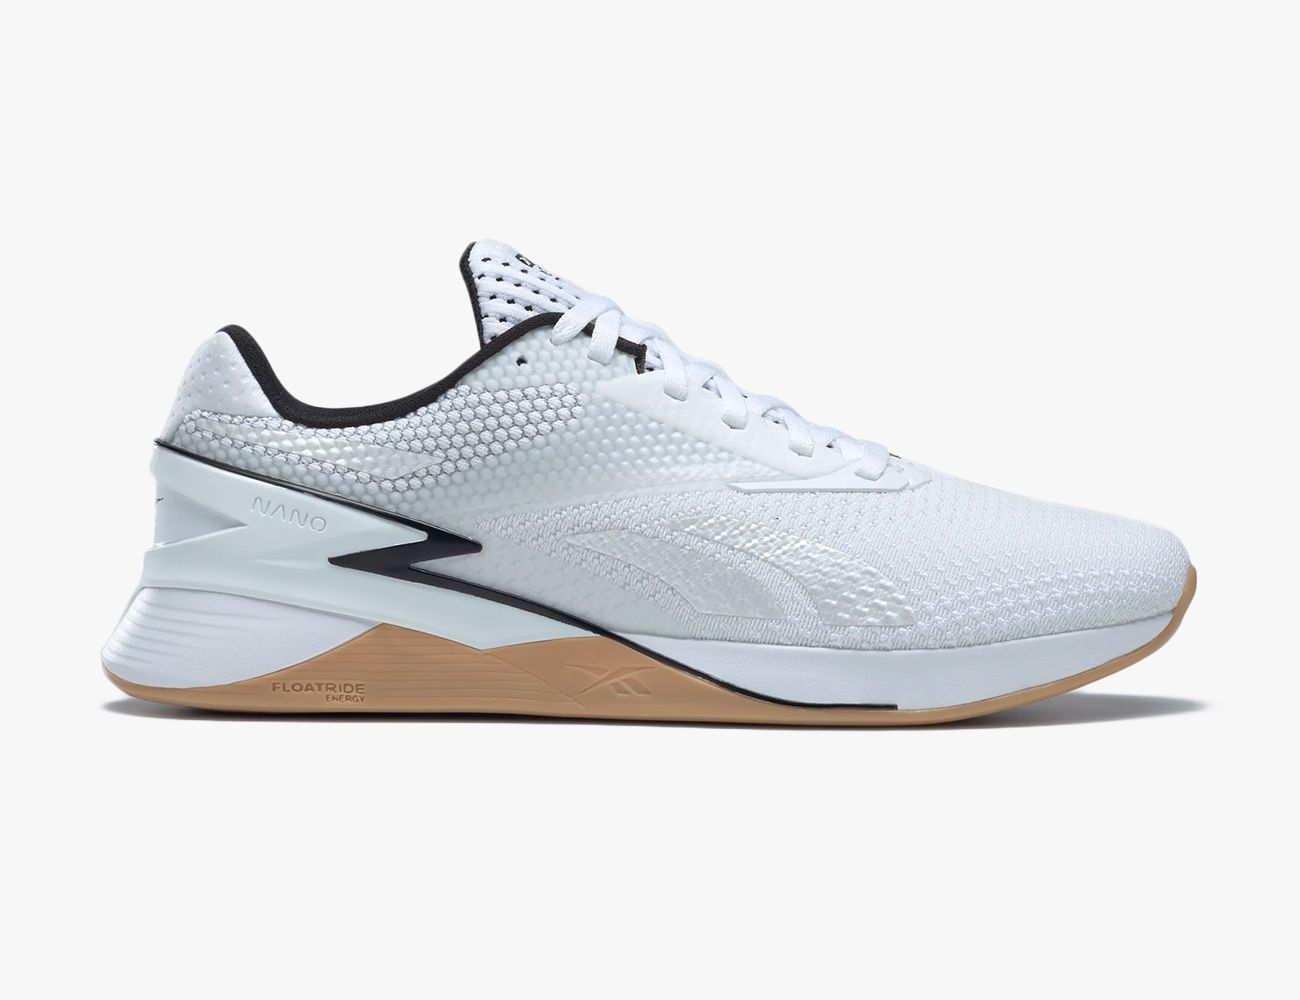 Reebok Nano X3 Review: Are These Best Yet?